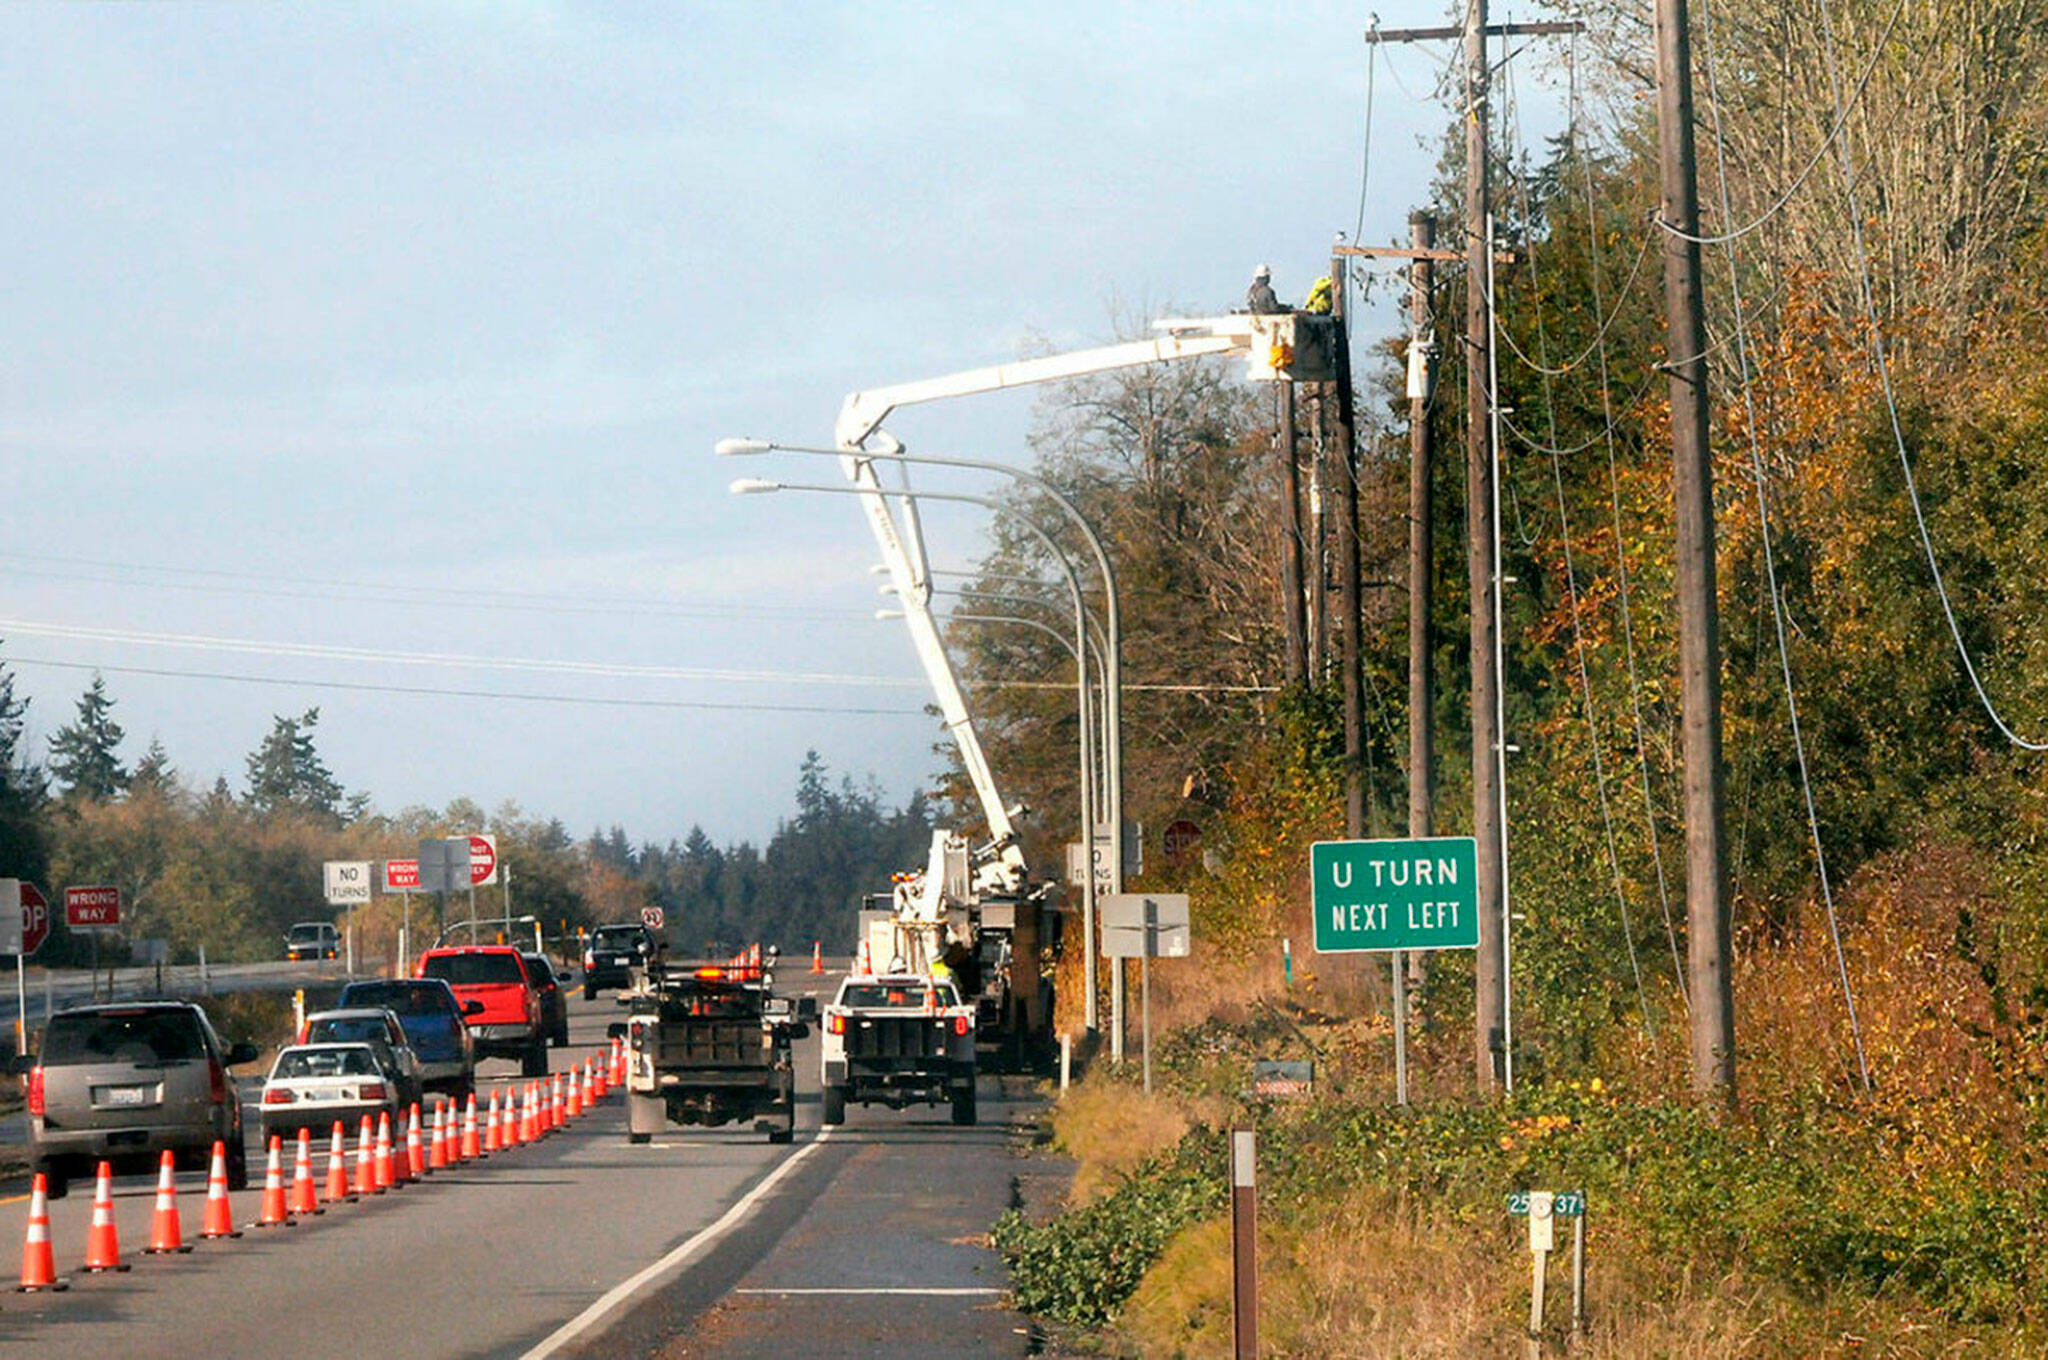 Keith Thorpe/ Olympic Peninsula News Group/ A line crew from Clallam PUD works to repair a powerline along U.S. Highway 101 west of Barr Road on Saturday, Nov. 5.